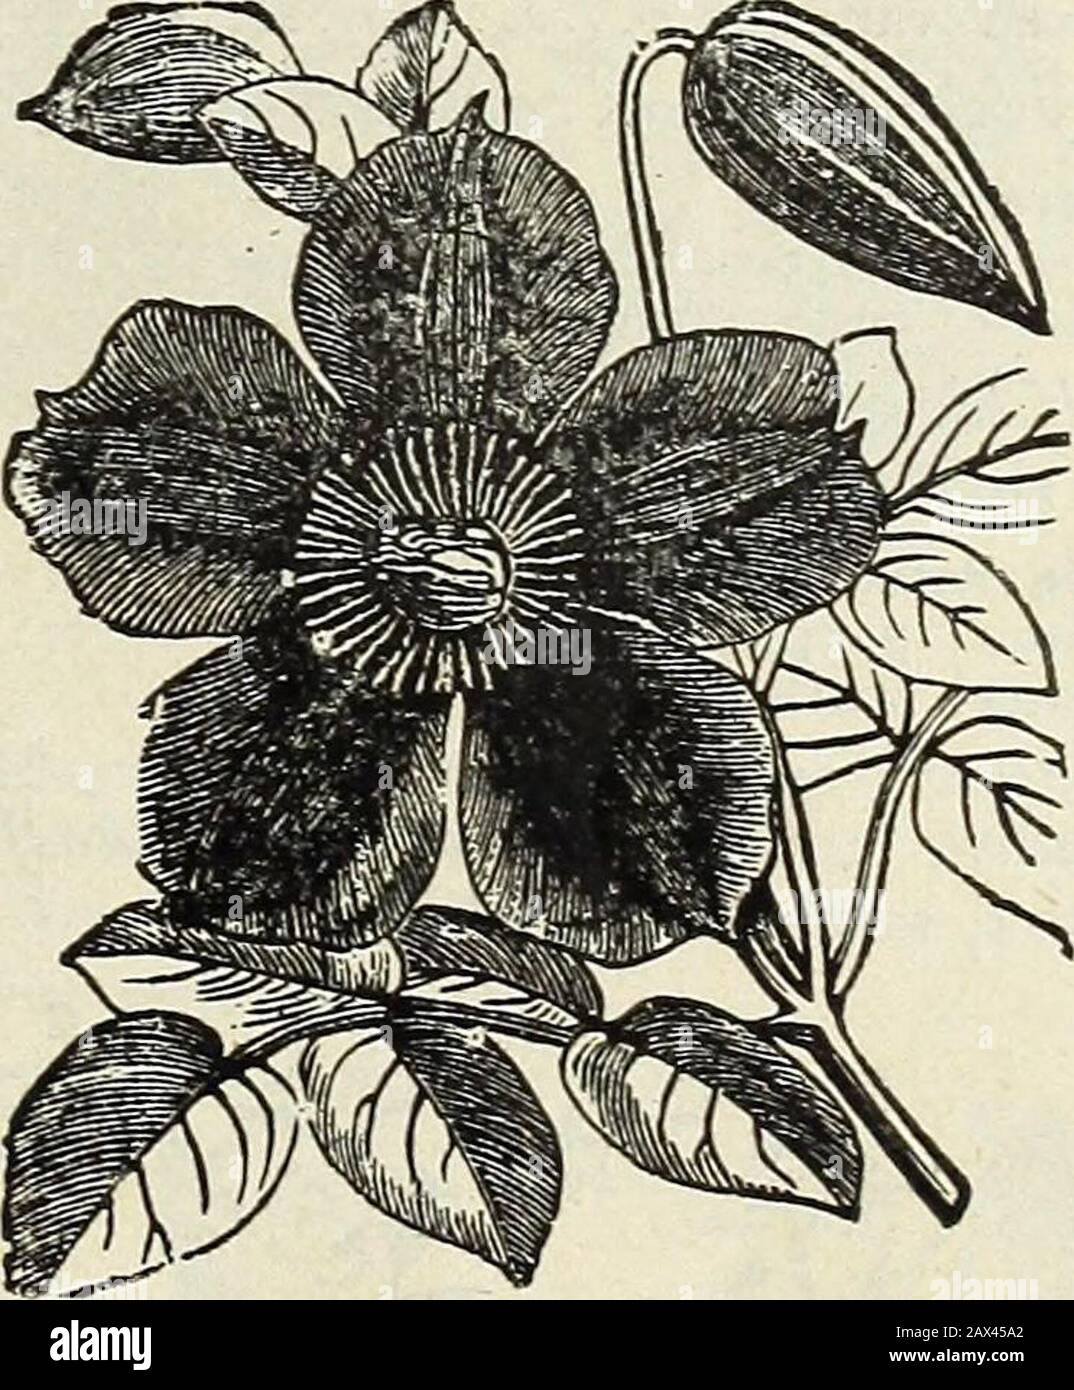 Spring catalogue of John Saul's new, rare and beautiful flower and garden seeds grown and imported by John Saul, Washington D.C1888 . Coboea.Clittoria Ccerulea; a climbing plant of moderategrowth, which flowers freely during summer;flowers in clusters of deep mazarine blue, pea-shaped Clematis flammula, (sweet scented Virgins bower); a perennial Climber, with white, very fragrant flowers Jackman type; seed from my superb collection, mixed Baloon Vine.Cypress Vine, (Ipomea quamoclit); a beautiful rapidgrowing Climber, with Fern-like foliage. Coccinea : bright crimson 0r Ivy-leaved, new ; scarle Stock Photo